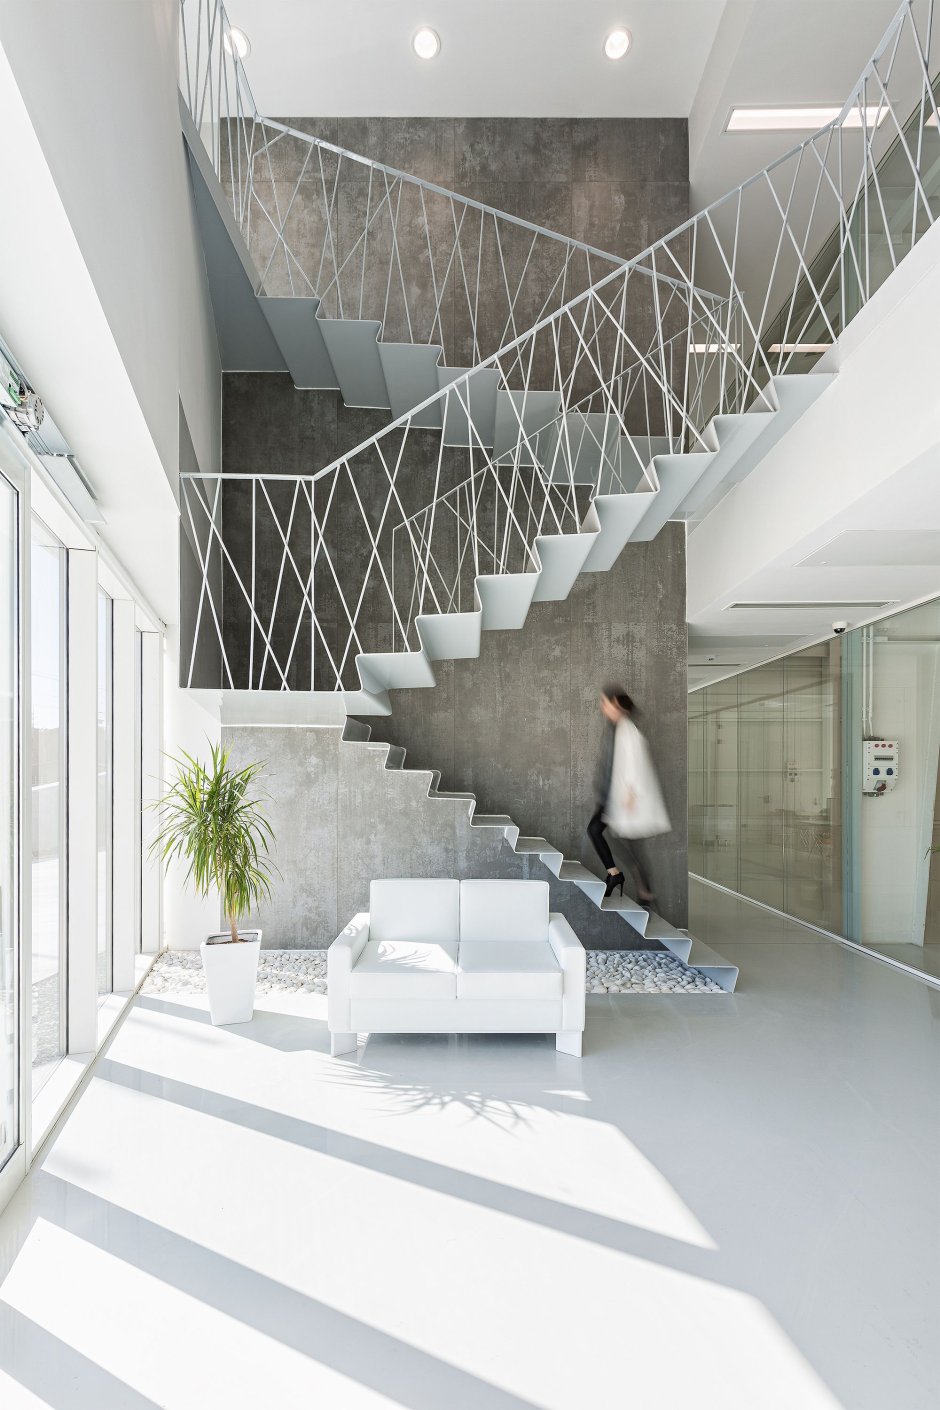 Bcompact Hybrid Stairs